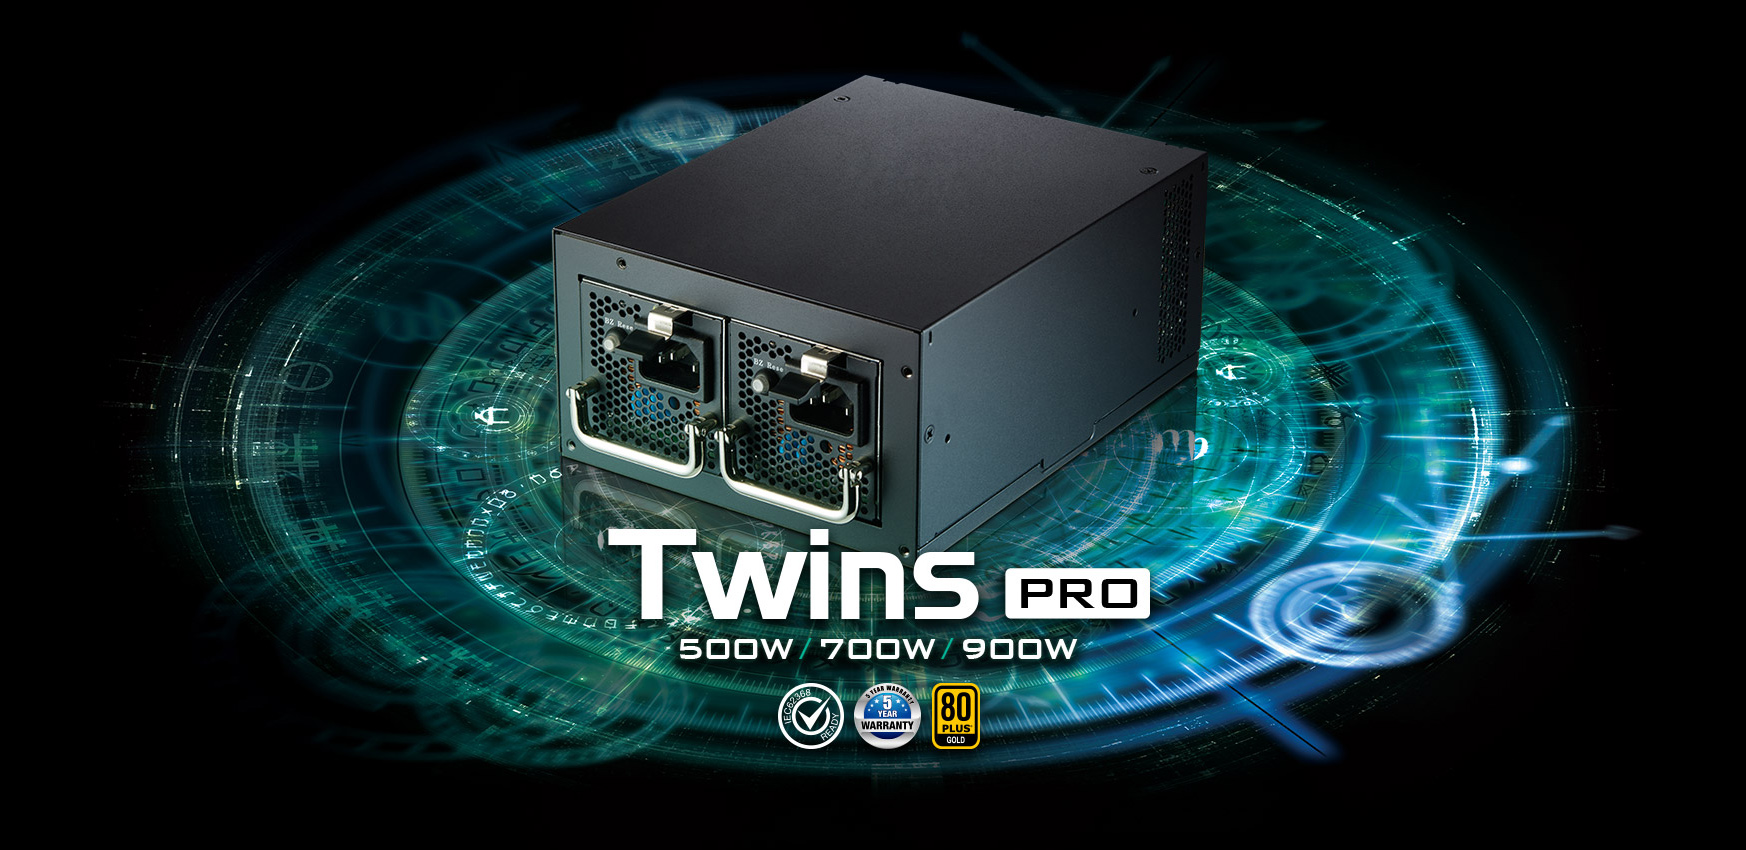  FSP Twins Pro ATX PS2 1+1 Dual Module 900W Certified 80 Plus  Gold Hot Swappable Redundant Digital Power Supply with Guardian Monitor  Software (Twins Pro 900) : Electronics